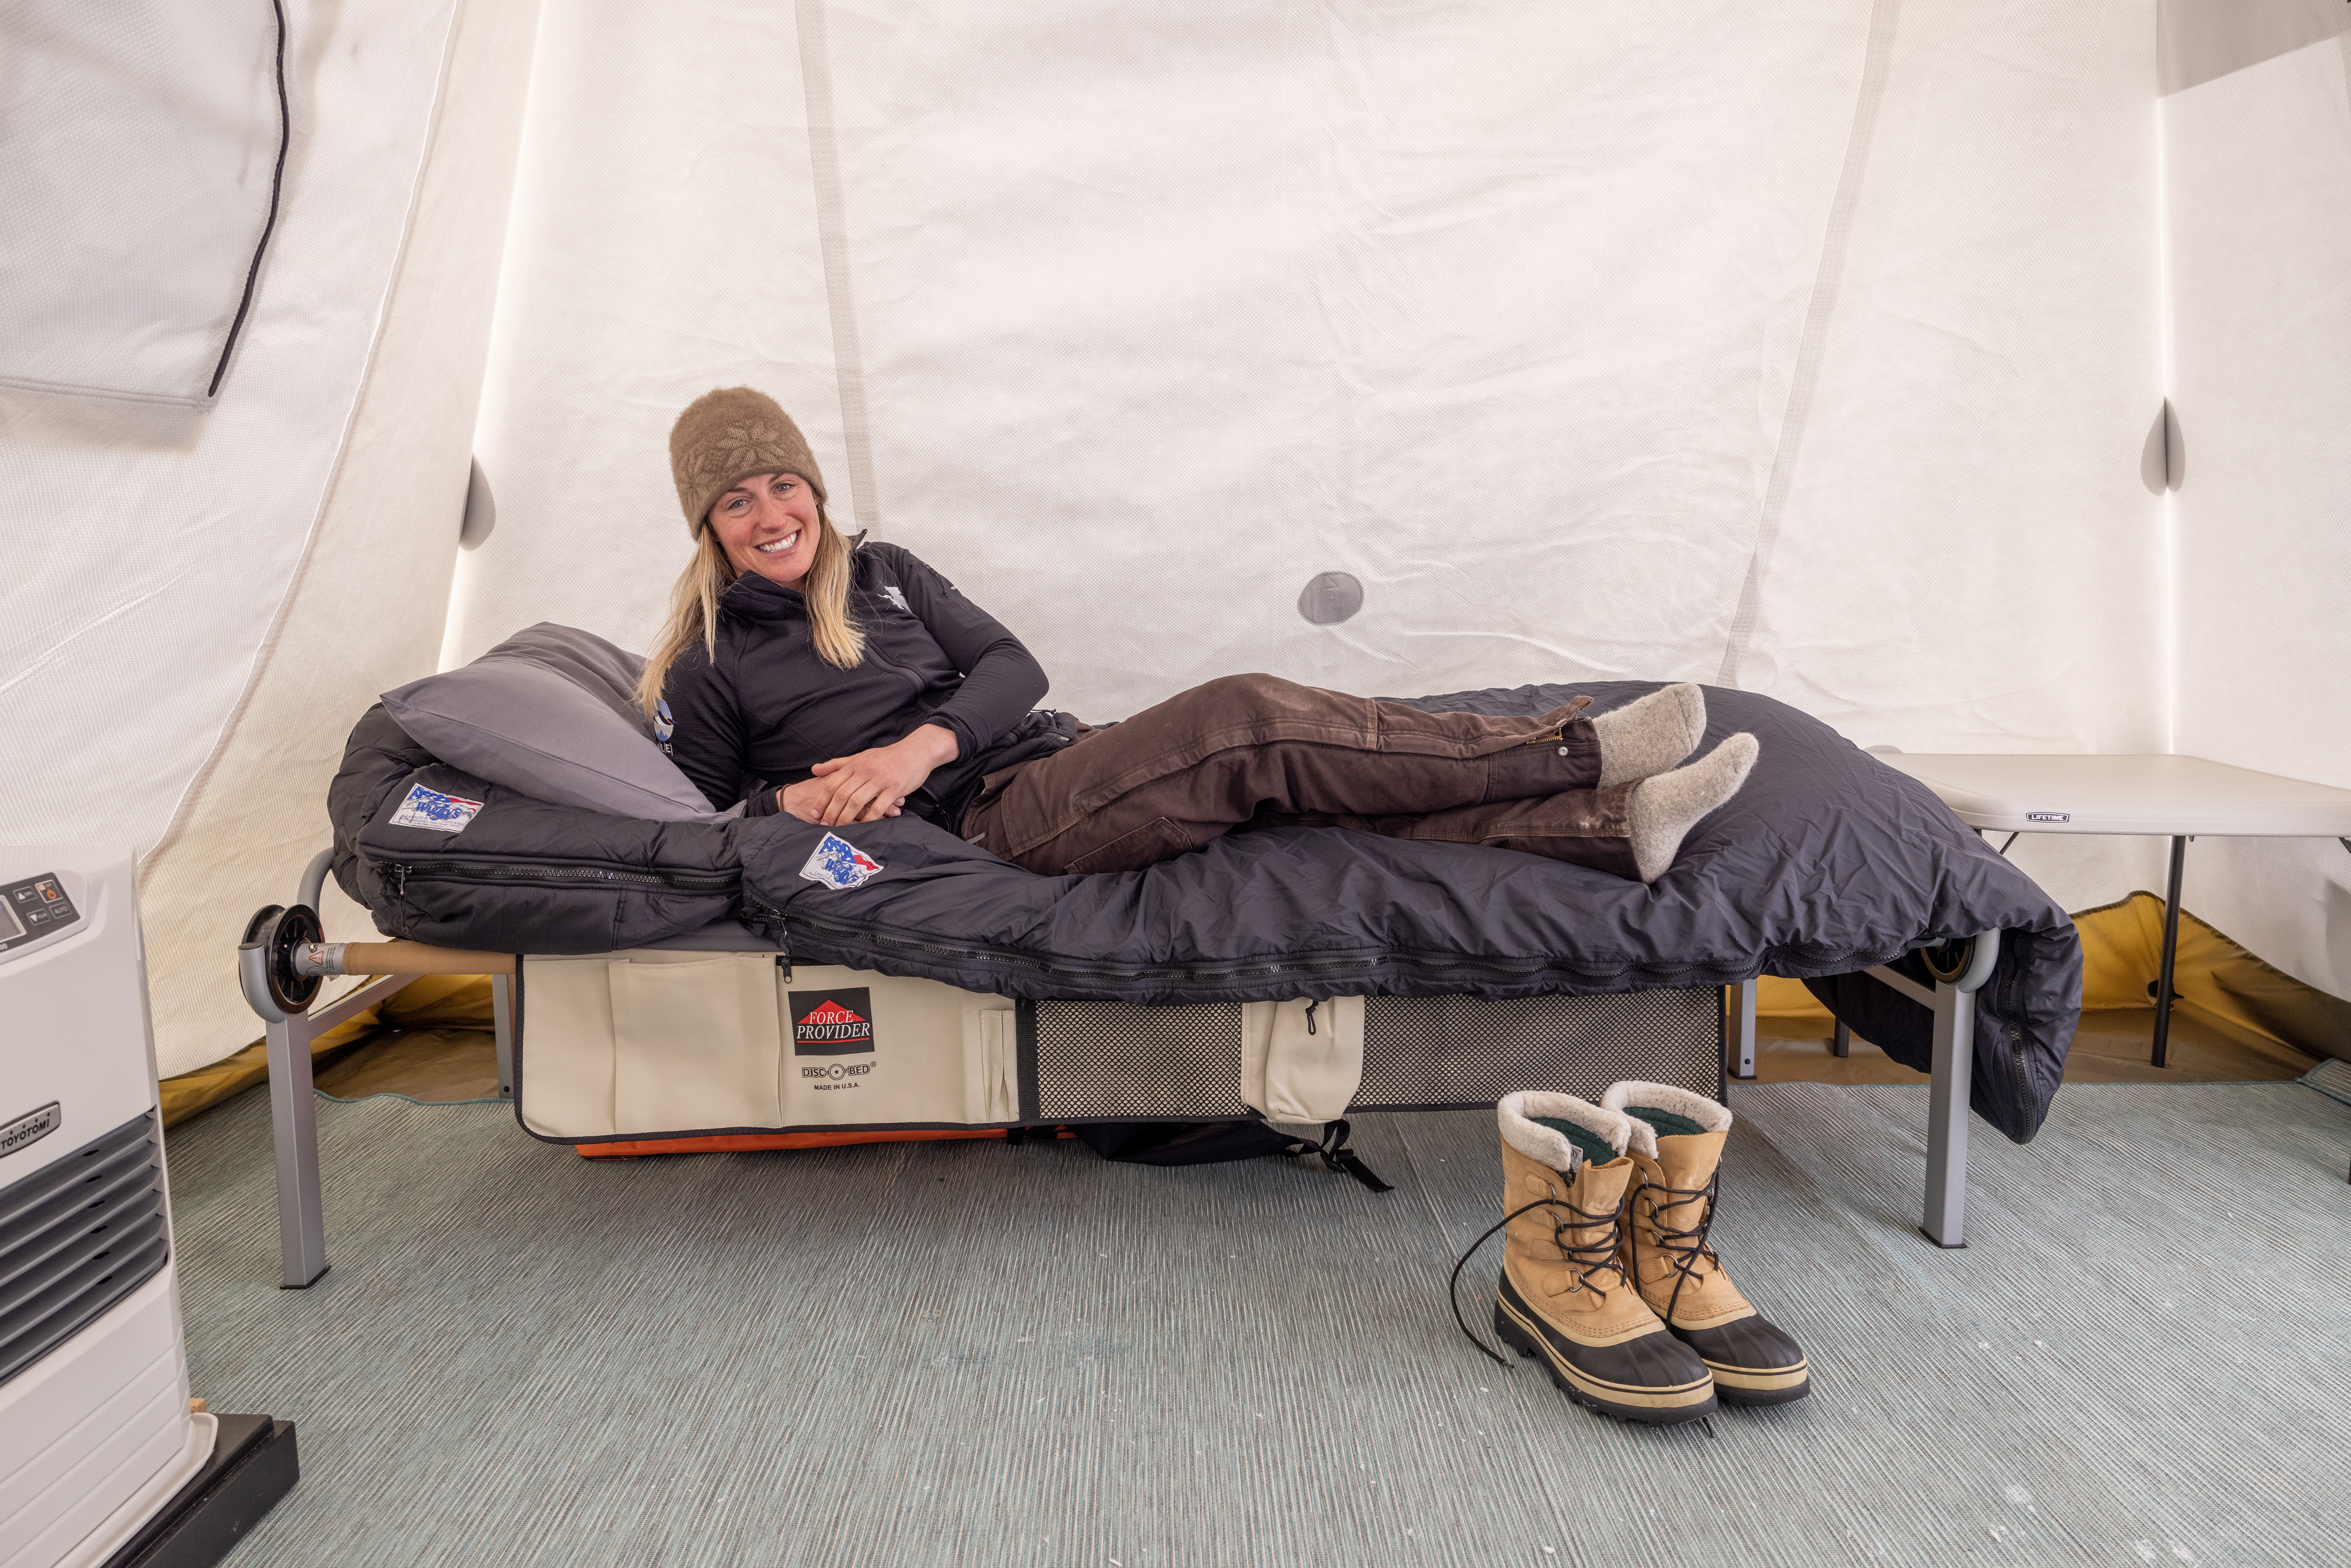 Brittni relaxes in her heated tent